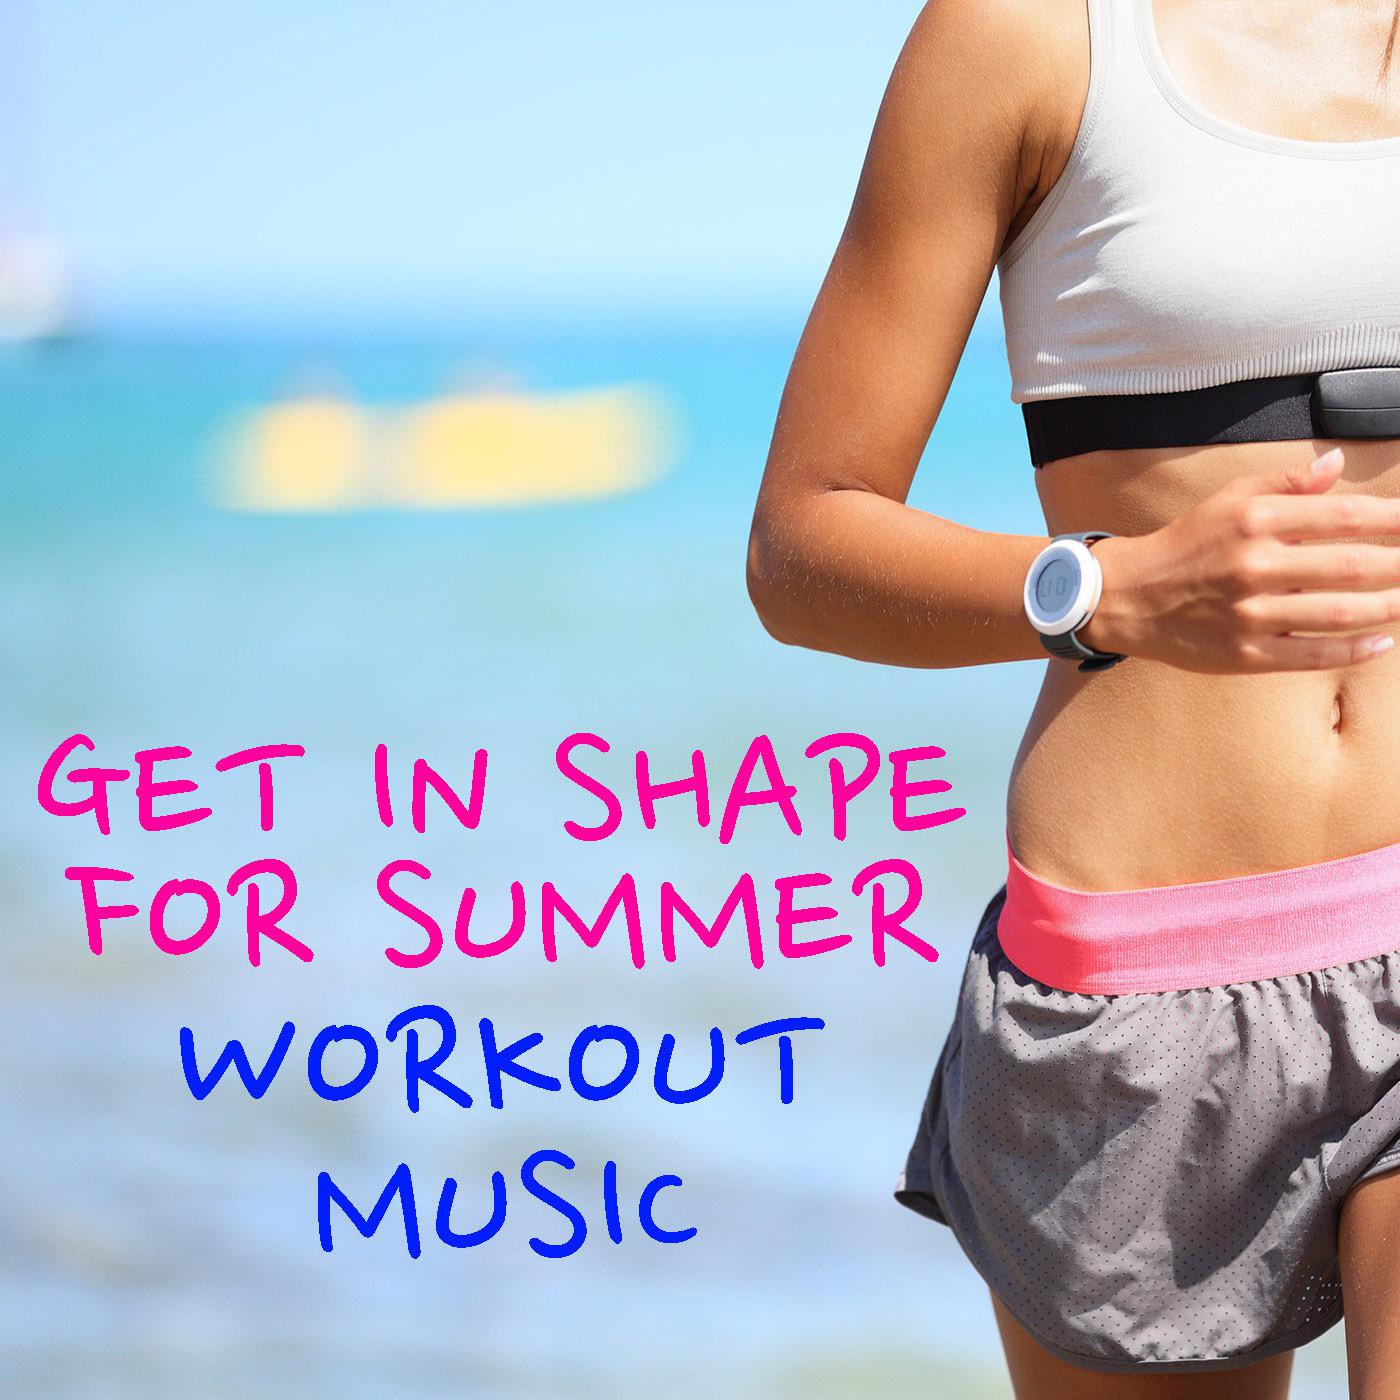 Get In Shape For Summer Workout Music